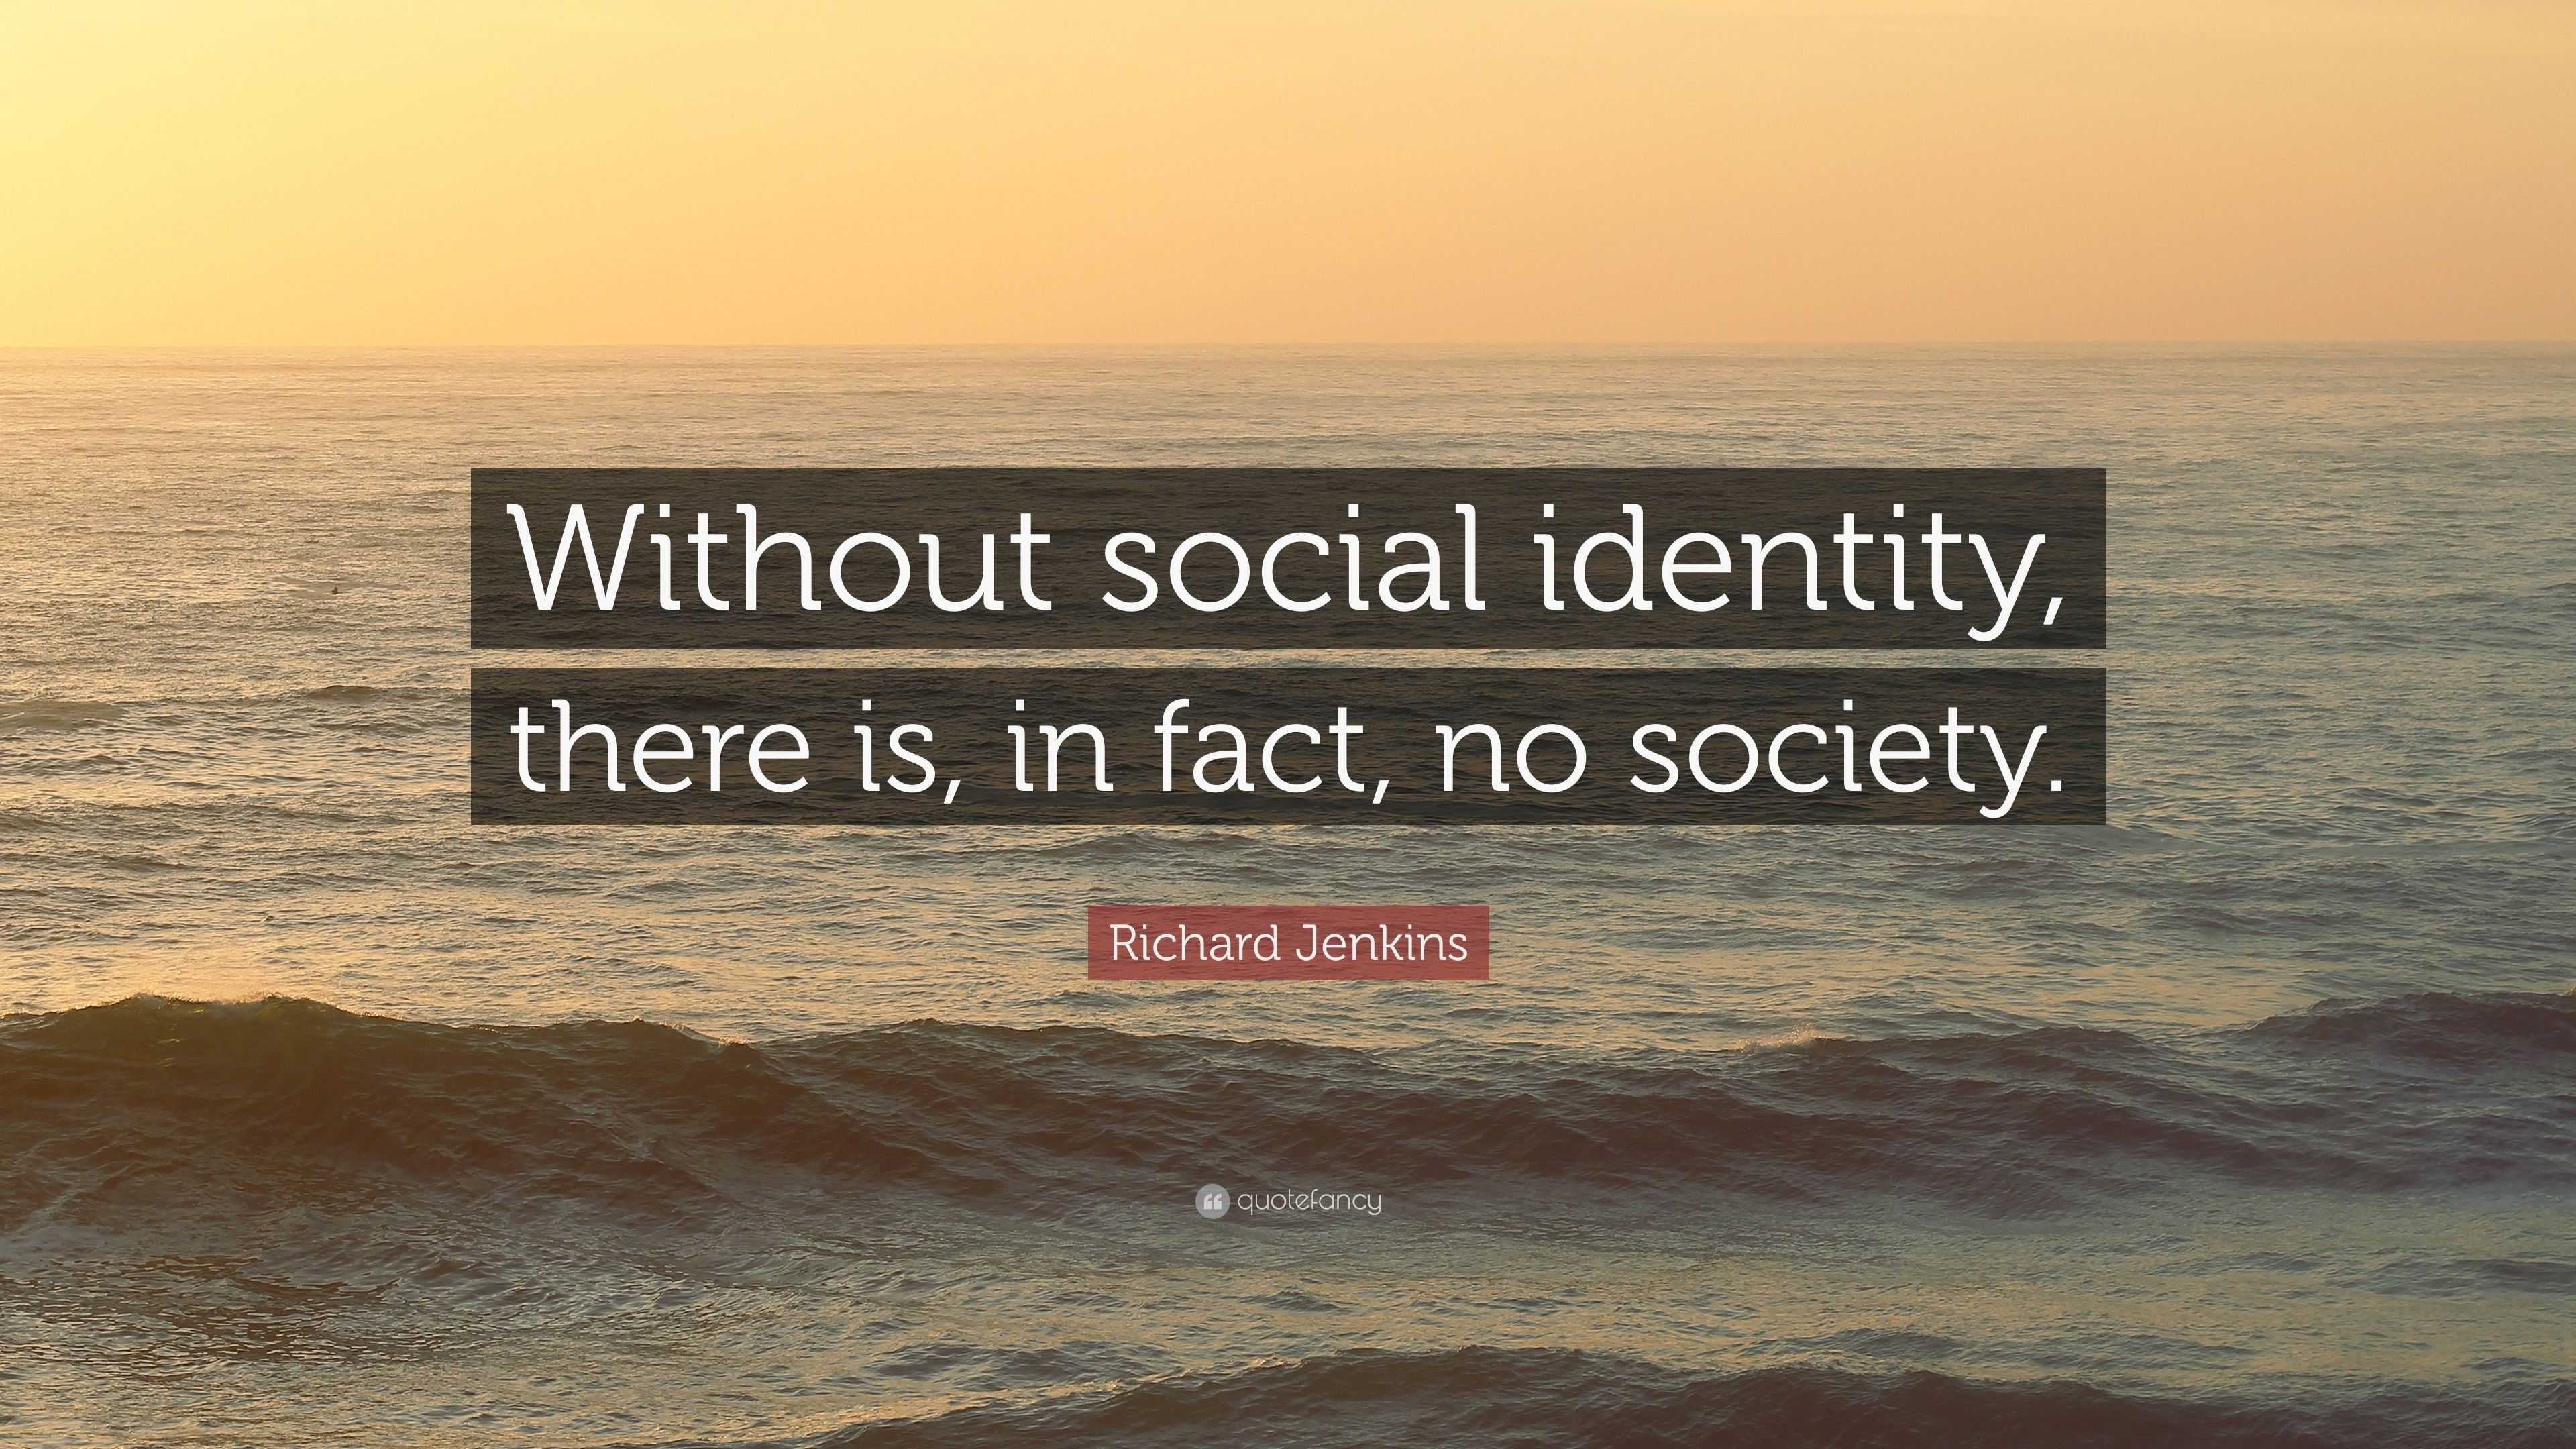 Richard Jenkins Quote: “Without social identity, there is, in fact, no